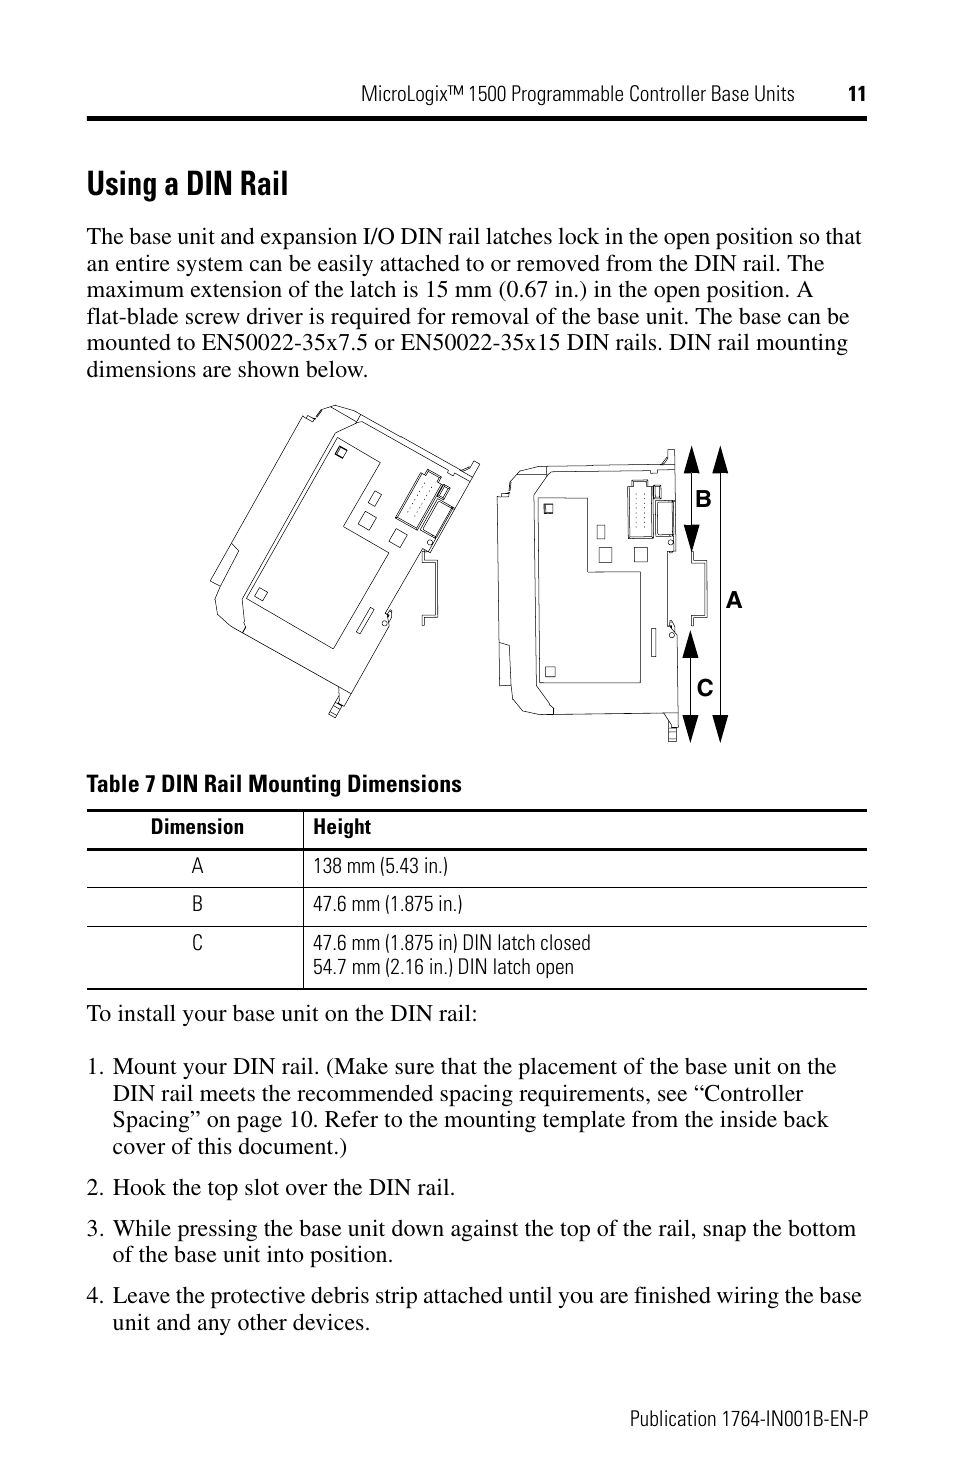 Using a din rail | Rockwell Automation 1764-28BXB MicroLogix 1500 Programmable Controller Base Units User Manual | Page 11 / 27